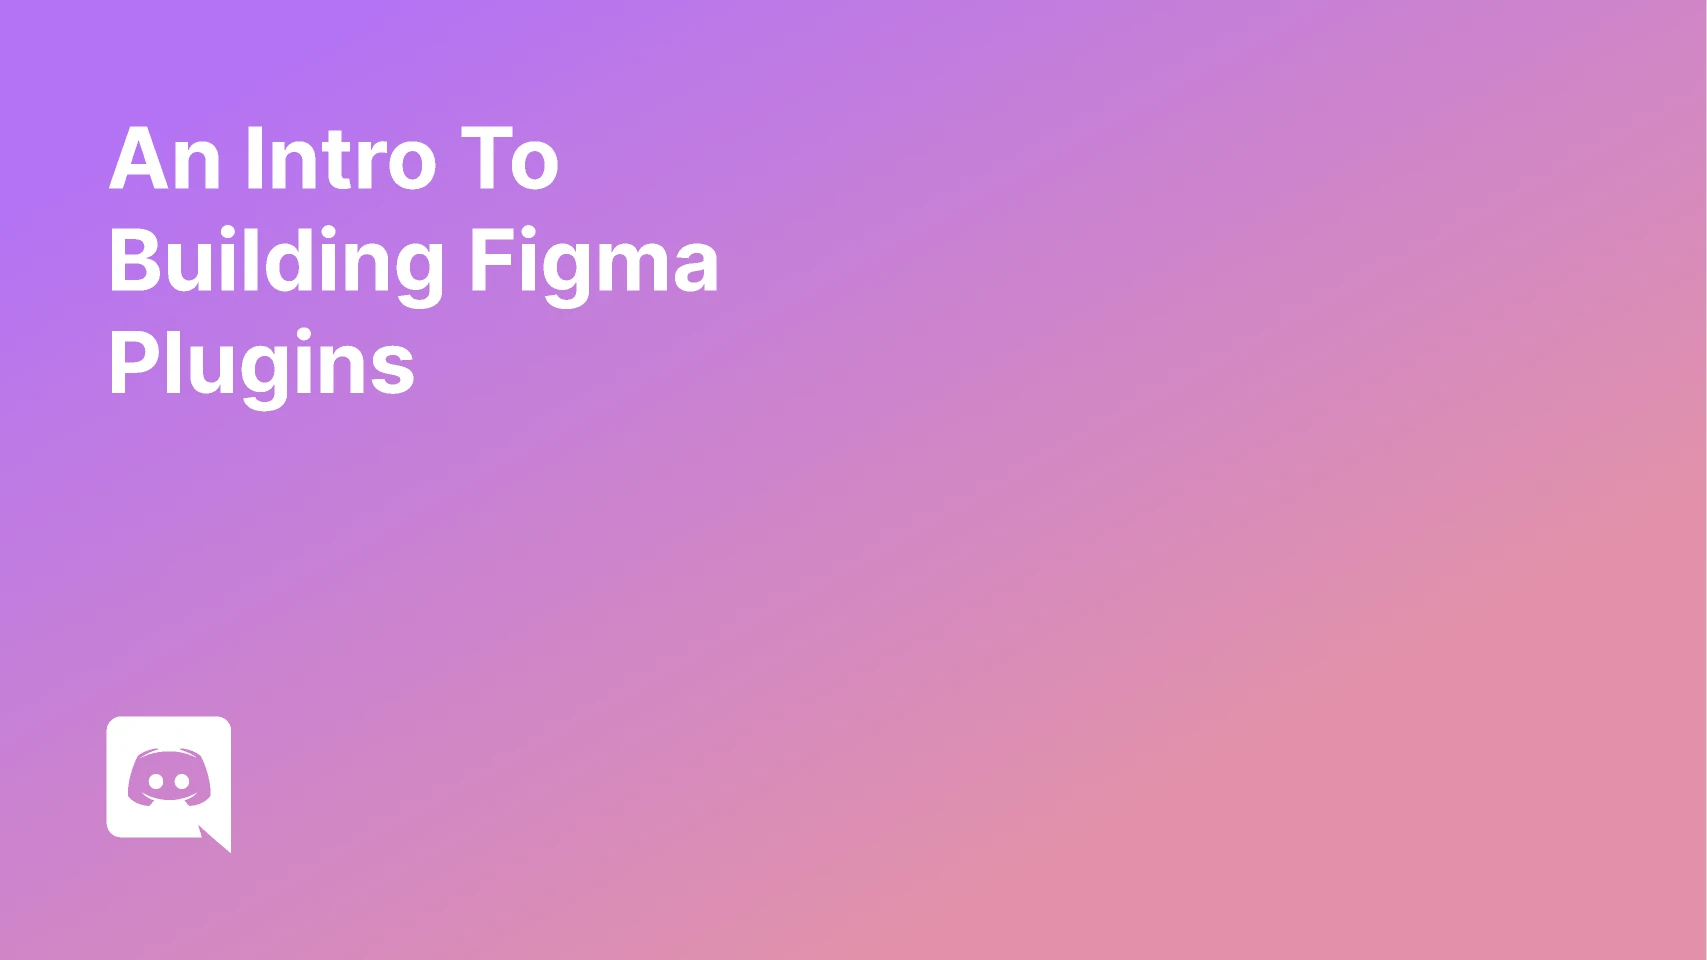 An Intro To Building Figma Plugins for Figma and Adobe XD